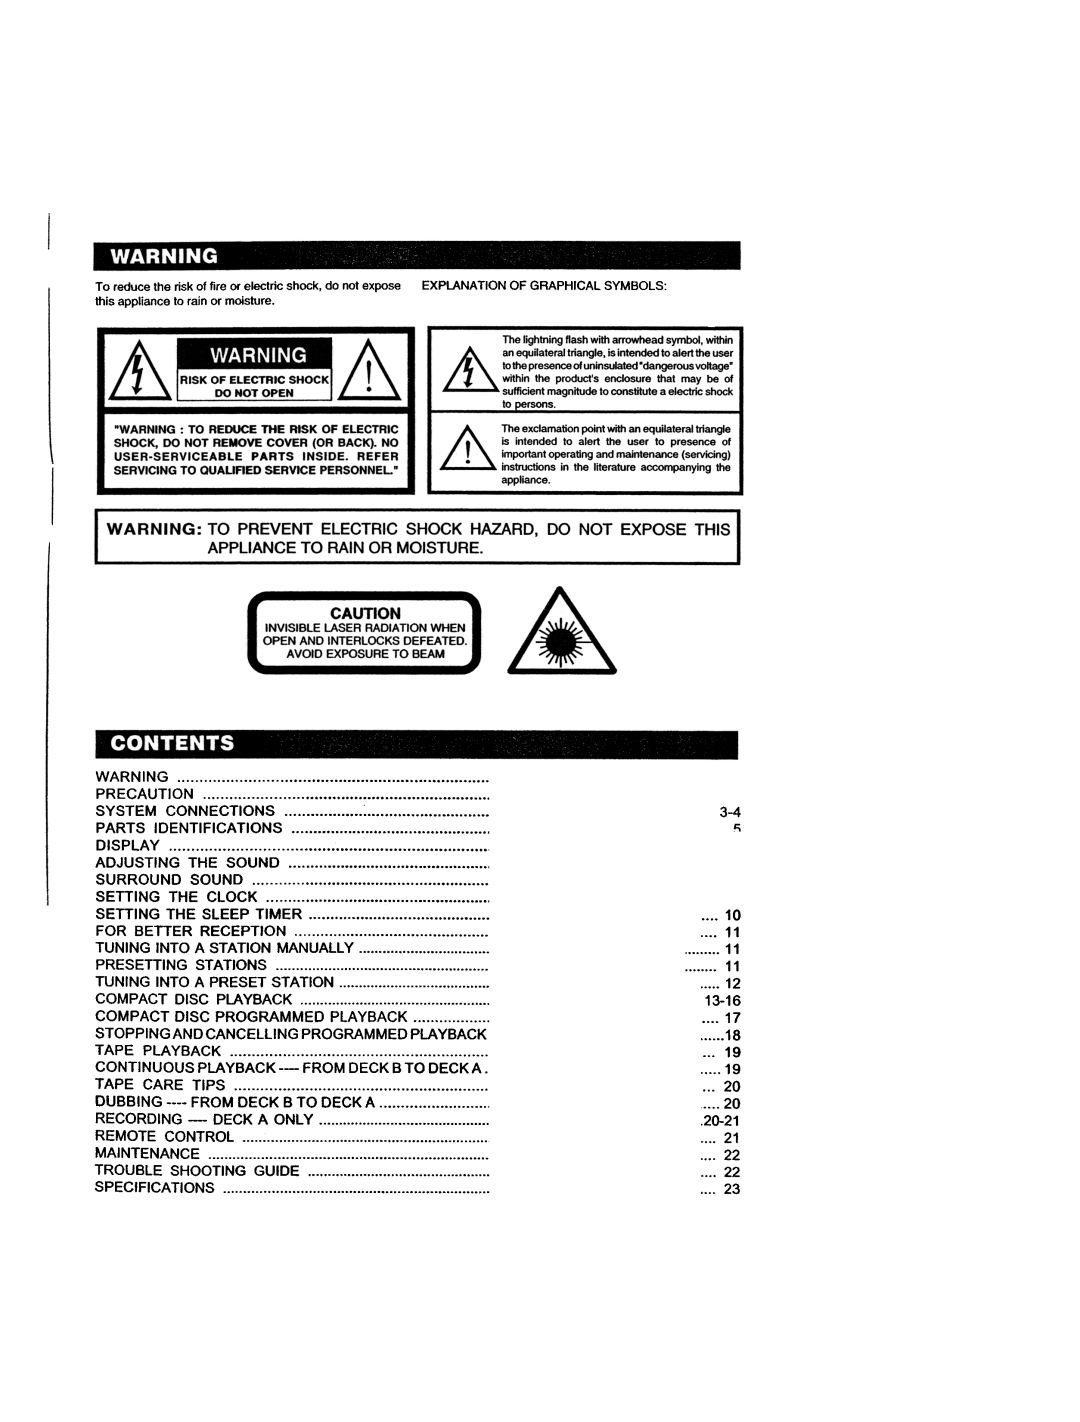 Dolby Laboratories CD Player manual 